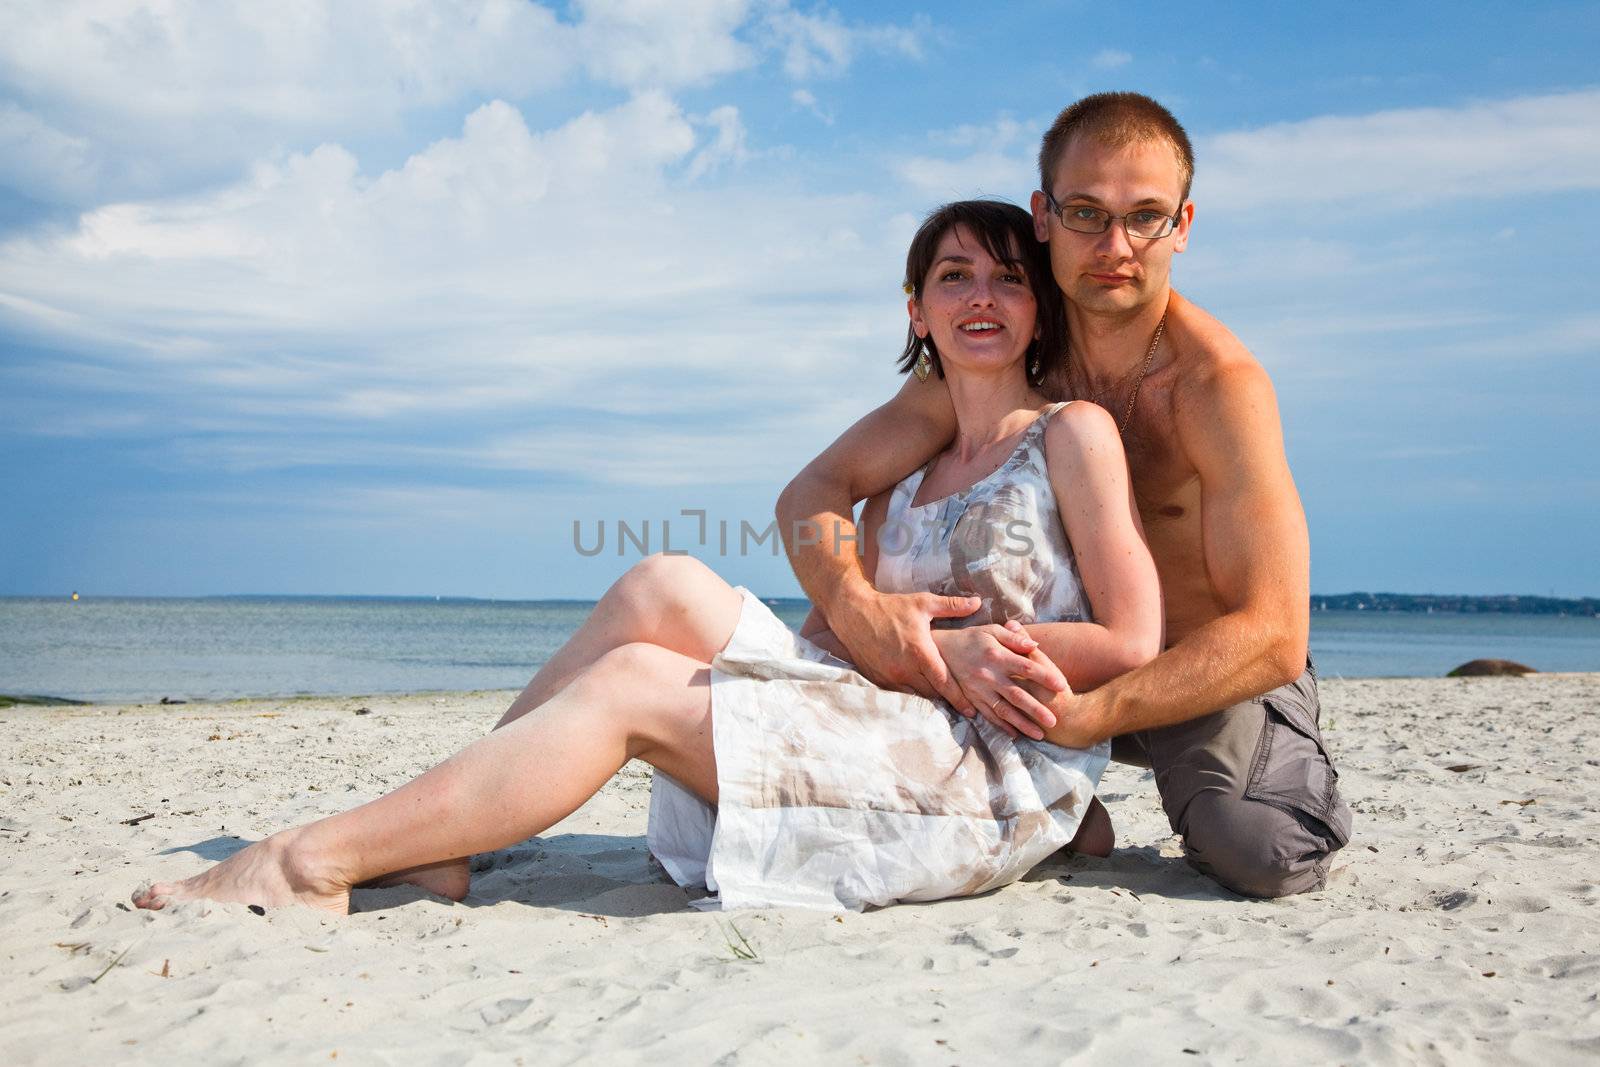 A young couple sitting together on the beach